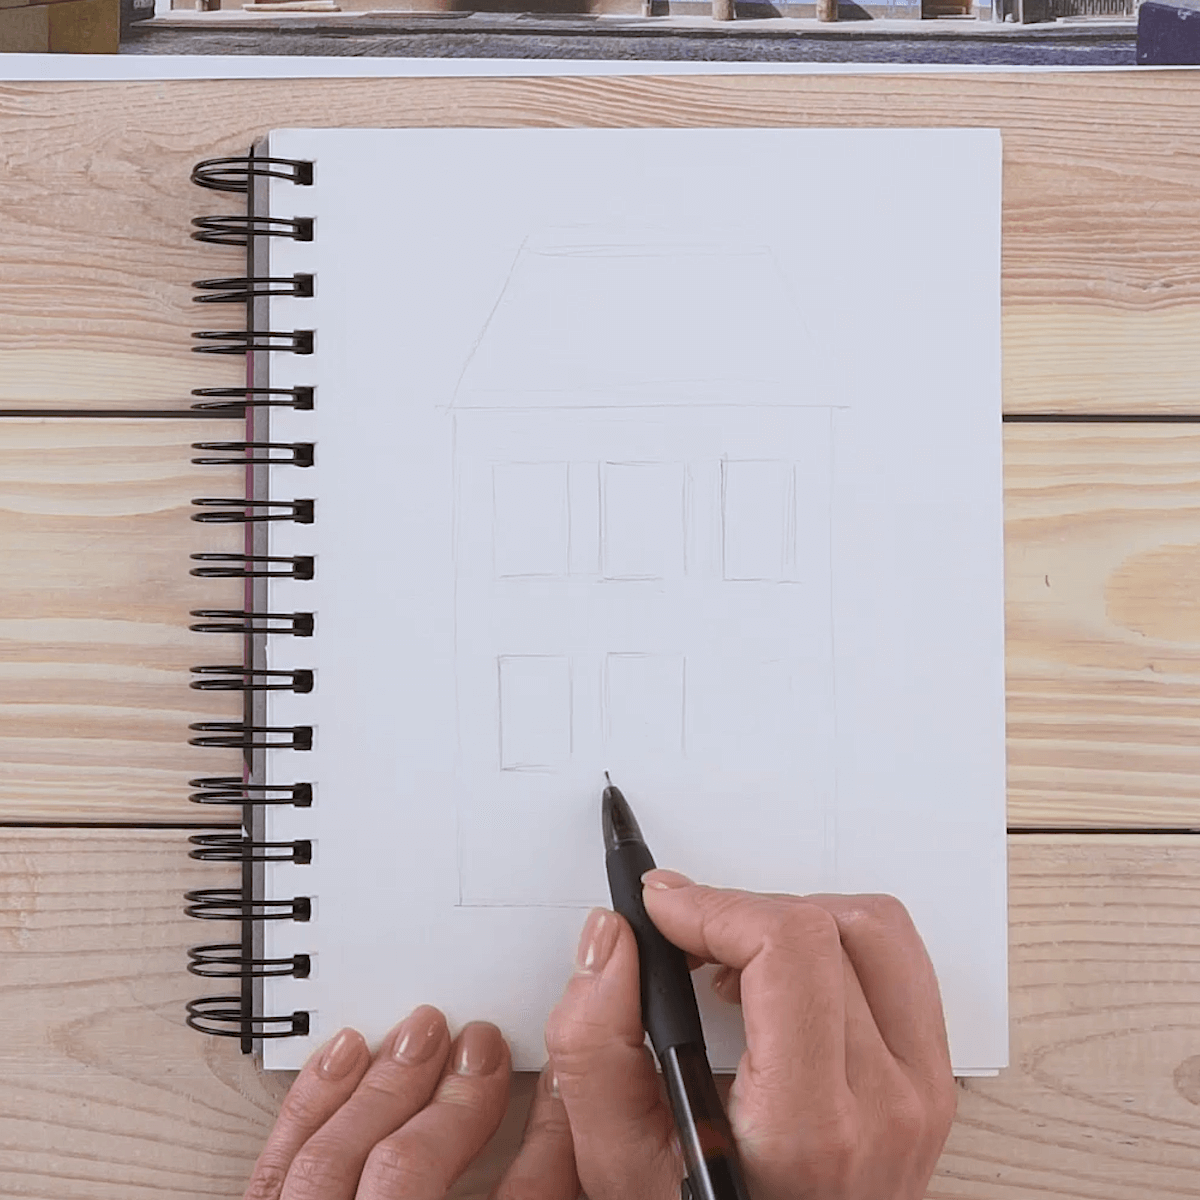 Step 1. Draw the House